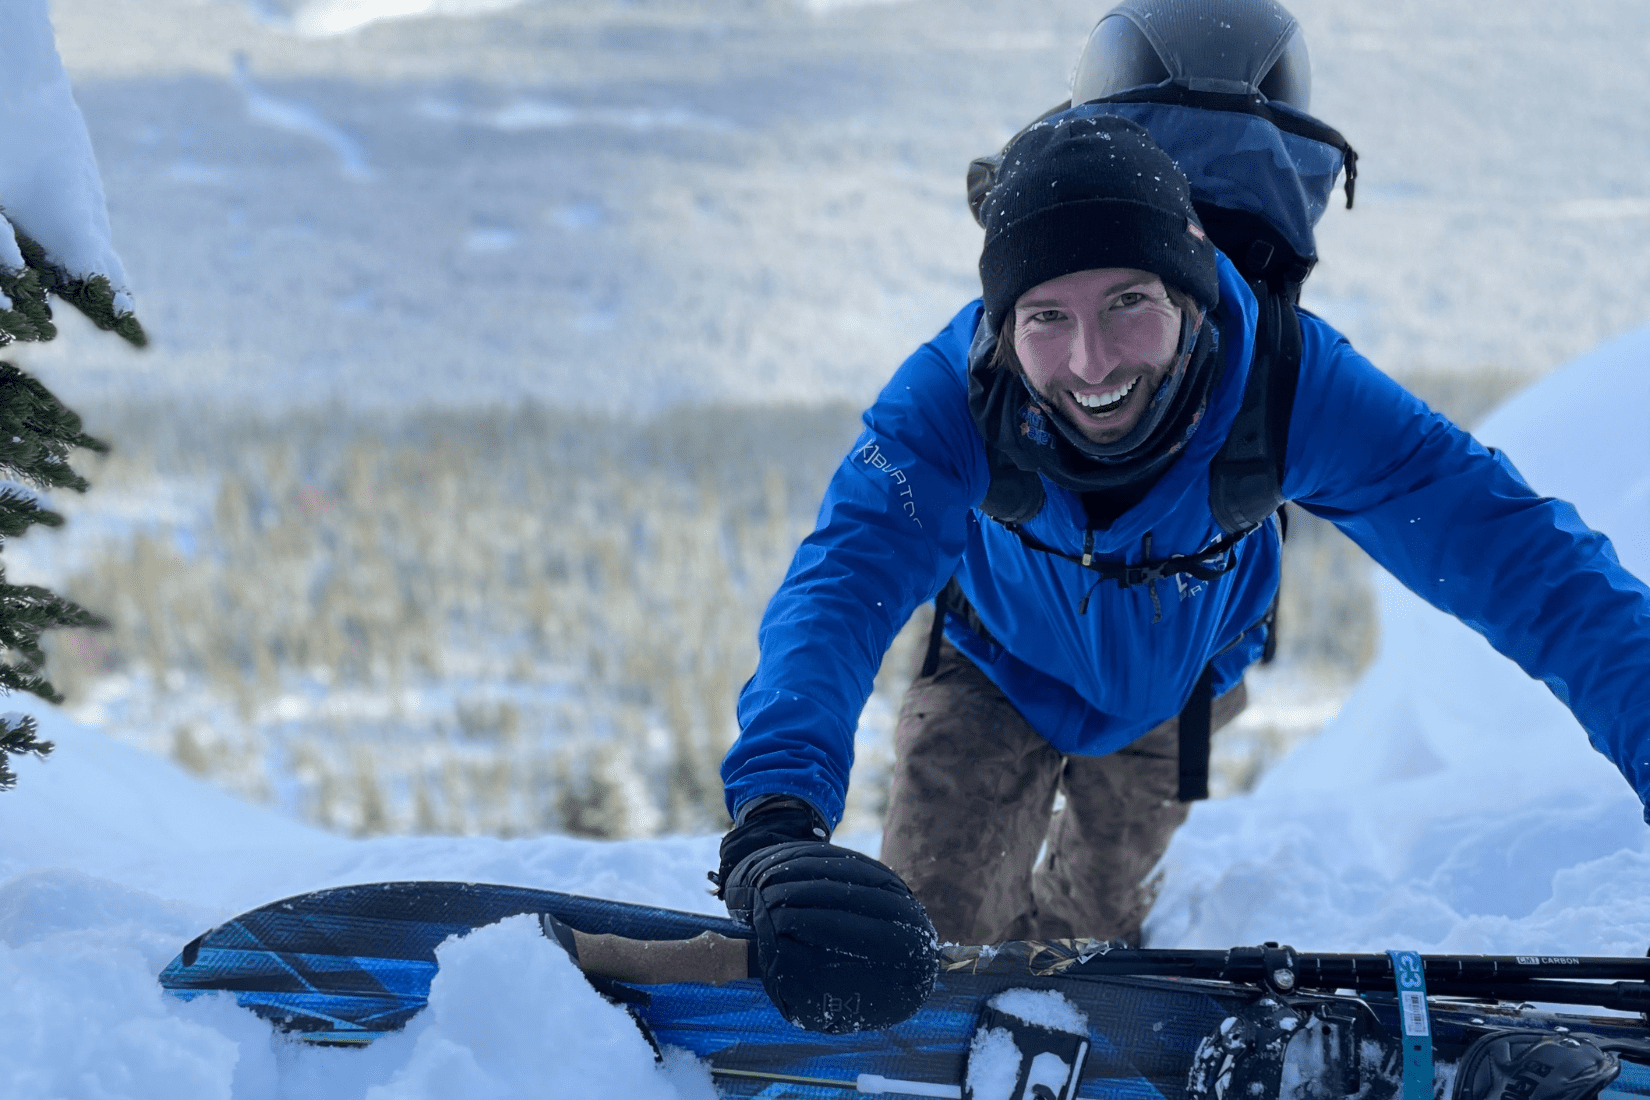 A man outside in winter smiling and holding a snowboard.